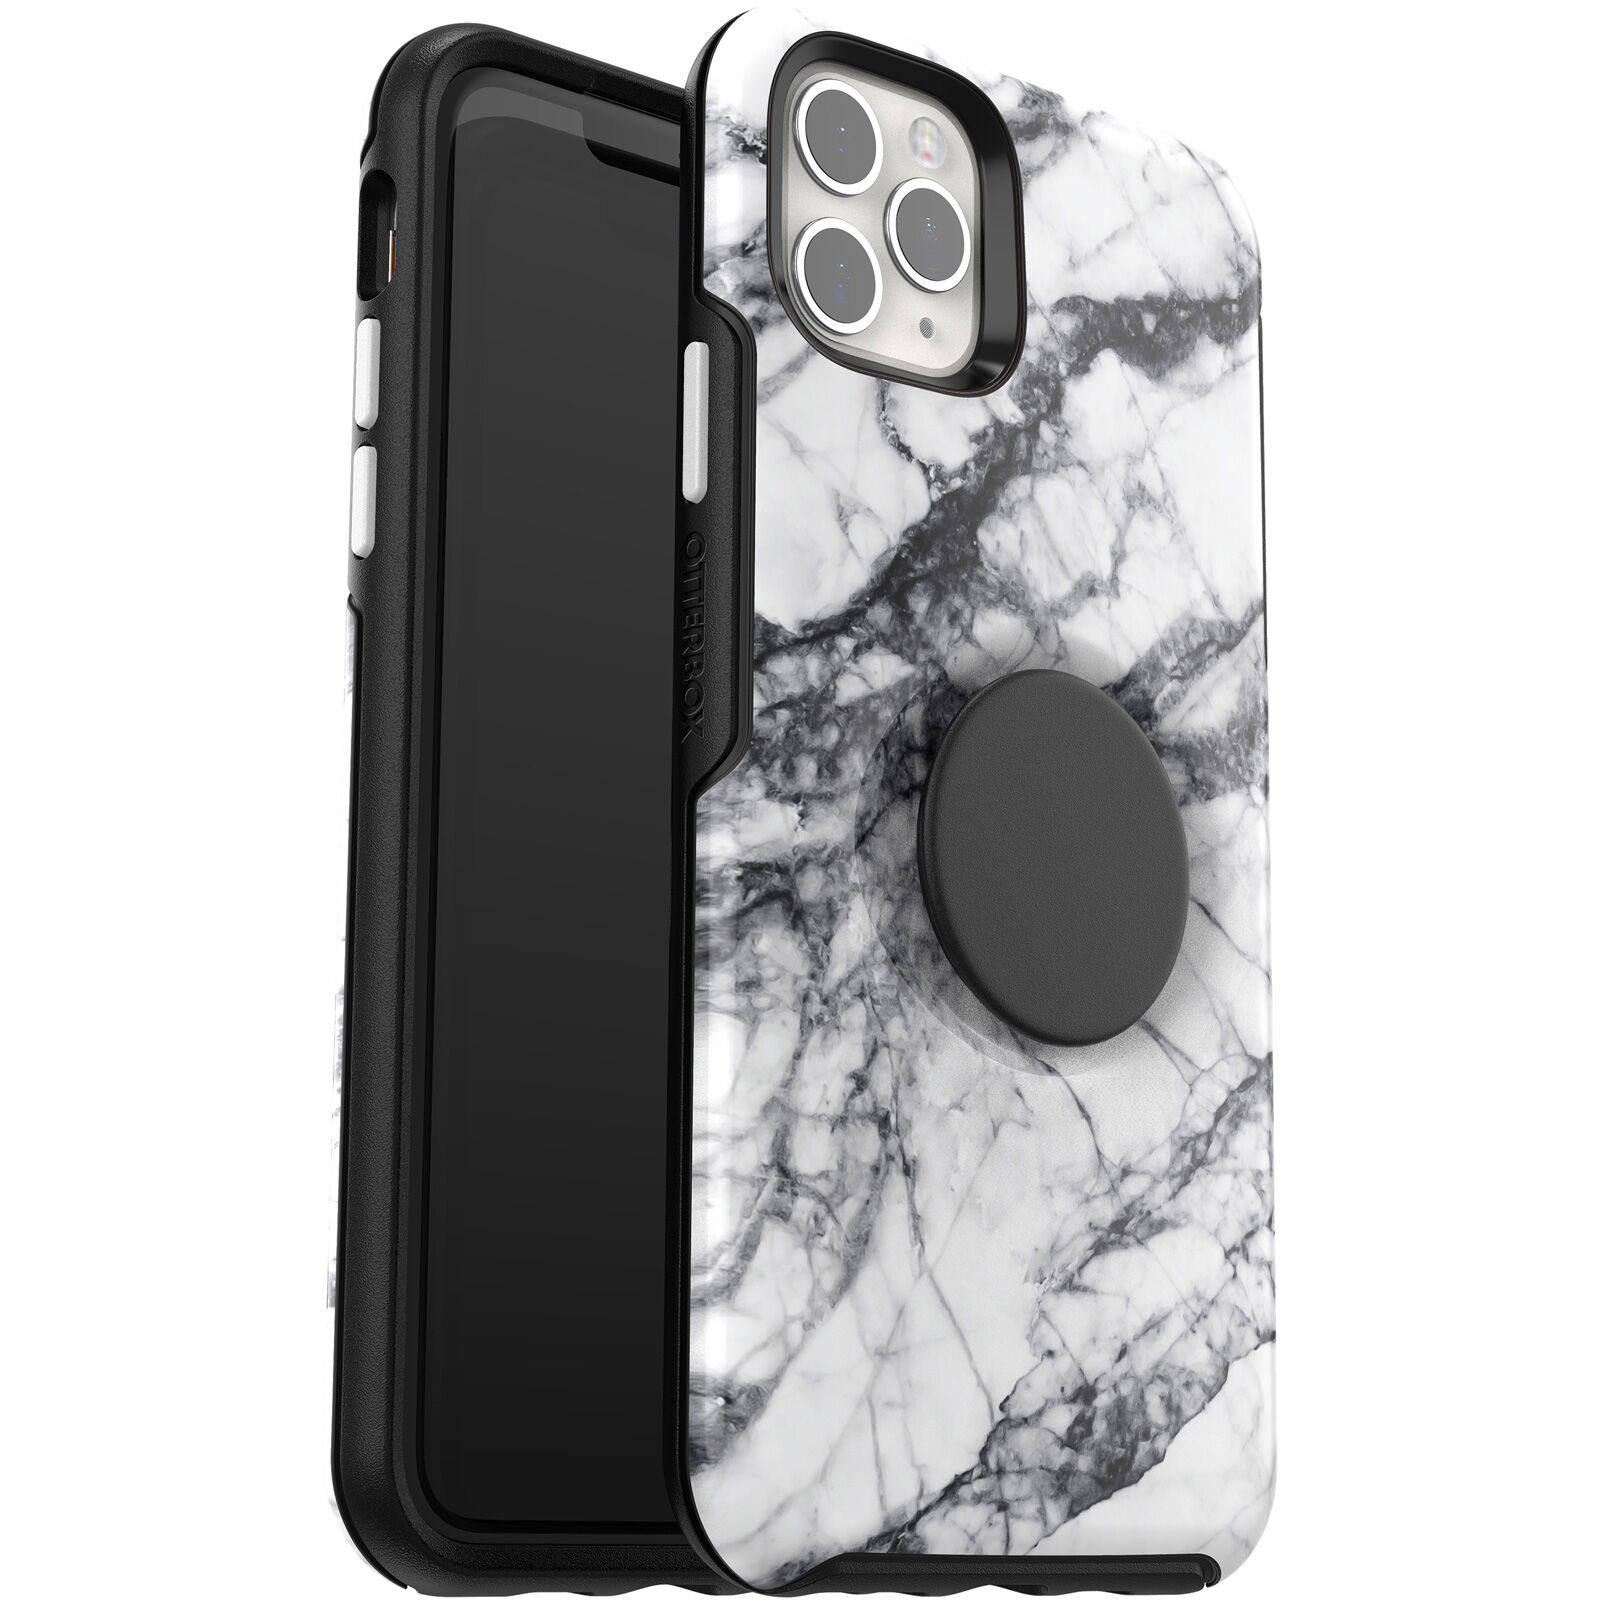 Cute PopSockets® case for iPhone 11 Pro Max